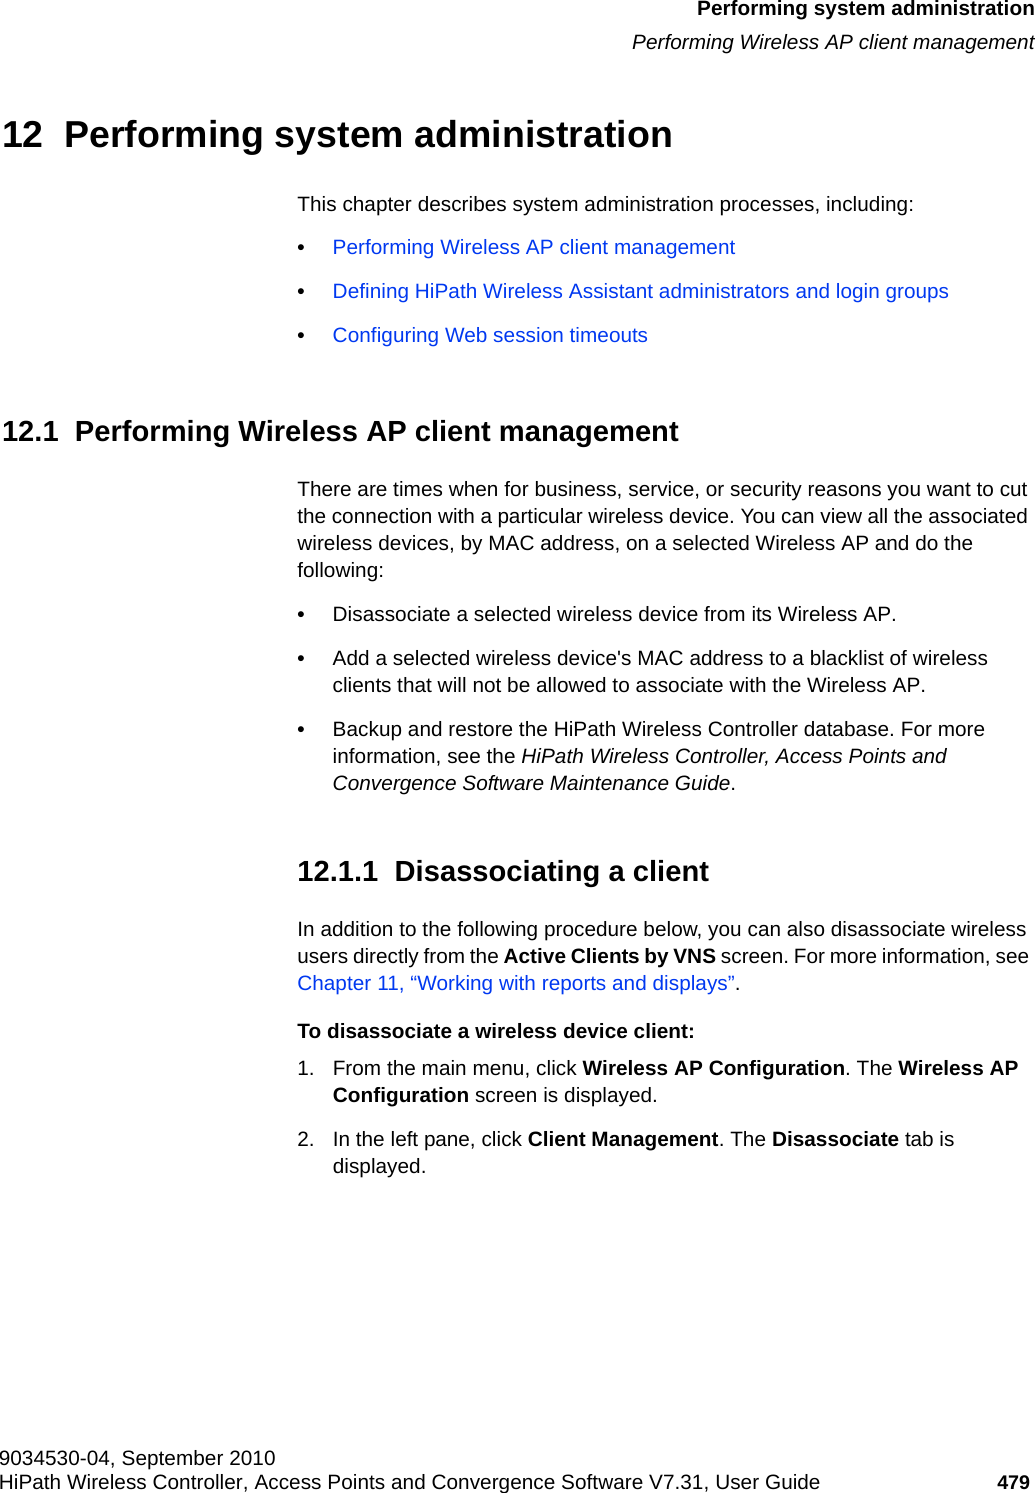 hwc_ongoing.fm9034530-04, September 2010HiPath Wireless Controller, Access Points and Convergence Software V7.31, User Guide 479      Performing system administrationPerforming Wireless AP client management12  Performing system administrationThis chapter describes system administration processes, including:•Performing Wireless AP client management•Defining HiPath Wireless Assistant administrators and login groups•Configuring Web session timeouts12.1  Performing Wireless AP client managementThere are times when for business, service, or security reasons you want to cut the connection with a particular wireless device. You can view all the associated wireless devices, by MAC address, on a selected Wireless AP and do the following:•Disassociate a selected wireless device from its Wireless AP. •Add a selected wireless device&apos;s MAC address to a blacklist of wireless clients that will not be allowed to associate with the Wireless AP.•Backup and restore the HiPath Wireless Controller database. For more information, see the HiPath Wireless Controller, Access Points and Convergence Software Maintenance Guide.12.1.1  Disassociating a clientIn addition to the following procedure below, you can also disassociate wireless users directly from the Active Clients by VNS screen. For more information, see Chapter 11, “Working with reports and displays”.To disassociate a wireless device client:1. From the main menu, click Wireless AP Configuration. The Wireless AP Configuration screen is displayed.2. In the left pane, click Client Management. The Disassociate tab is displayed.